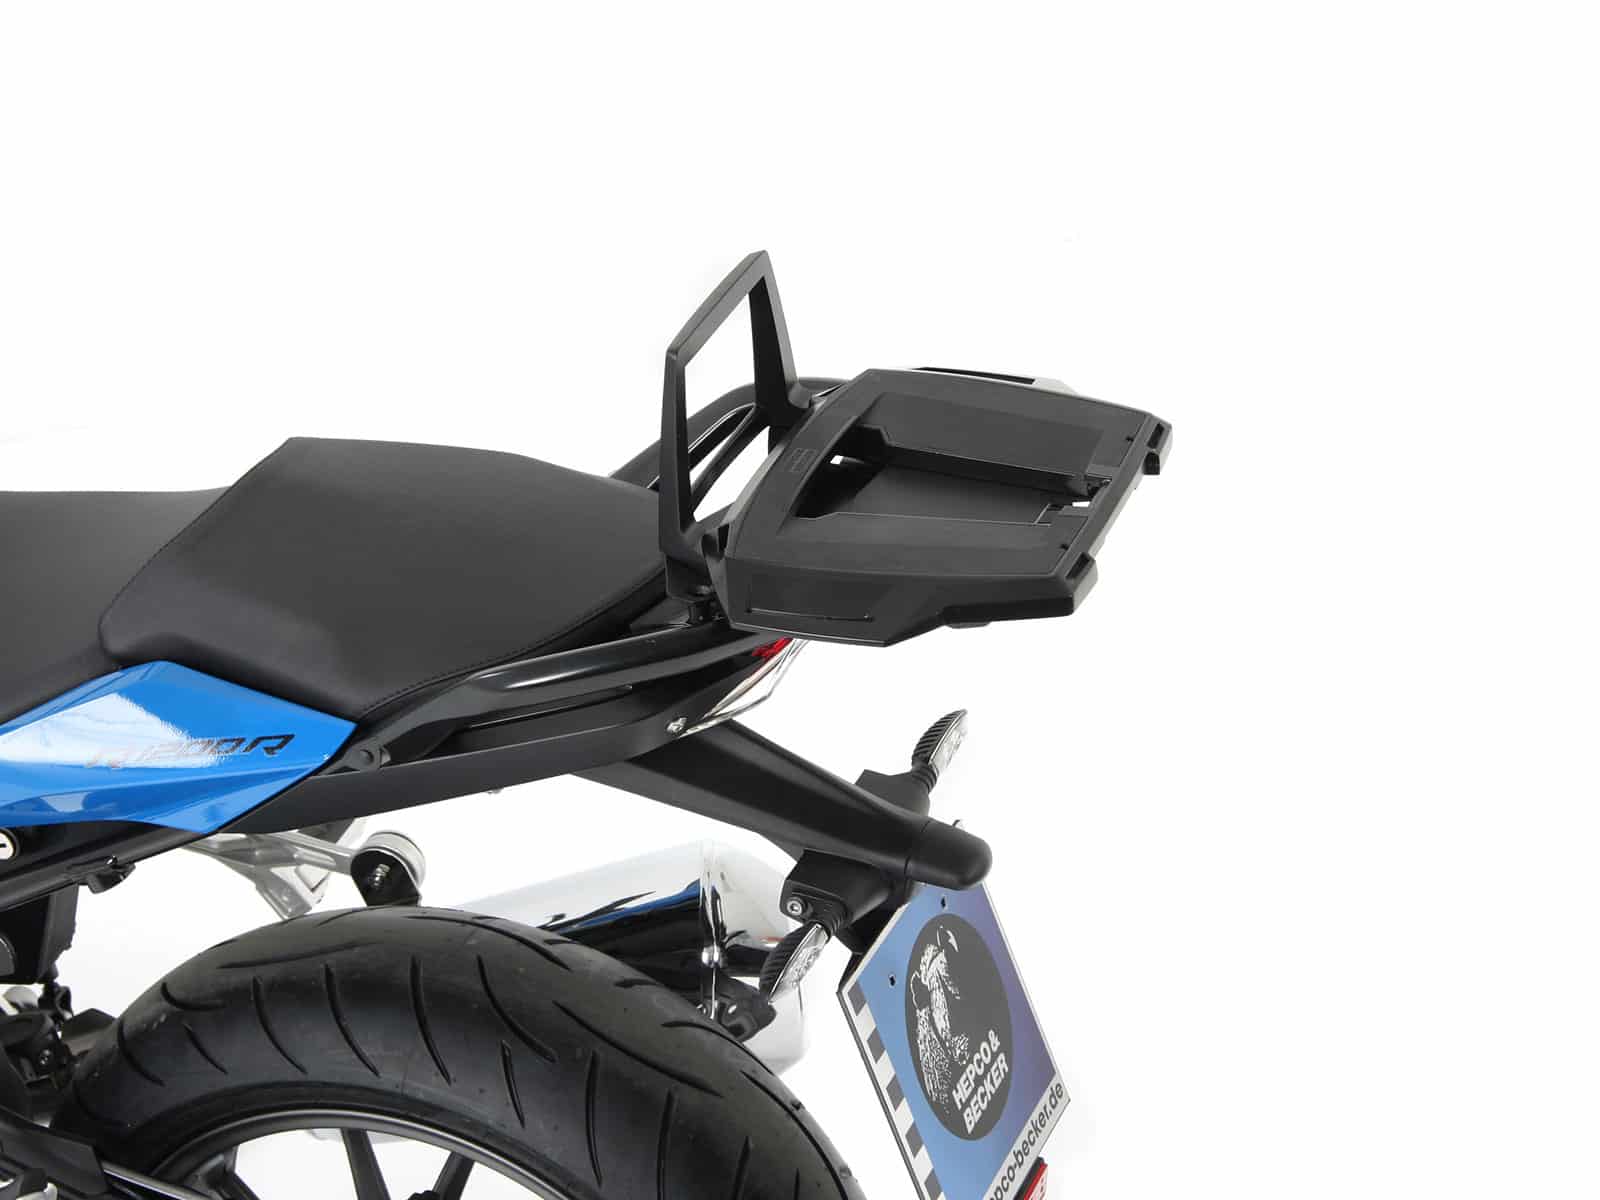 Alurack top case carrier black for combination with BMW rear-rack for BMW R 1200 R (2015-2018)